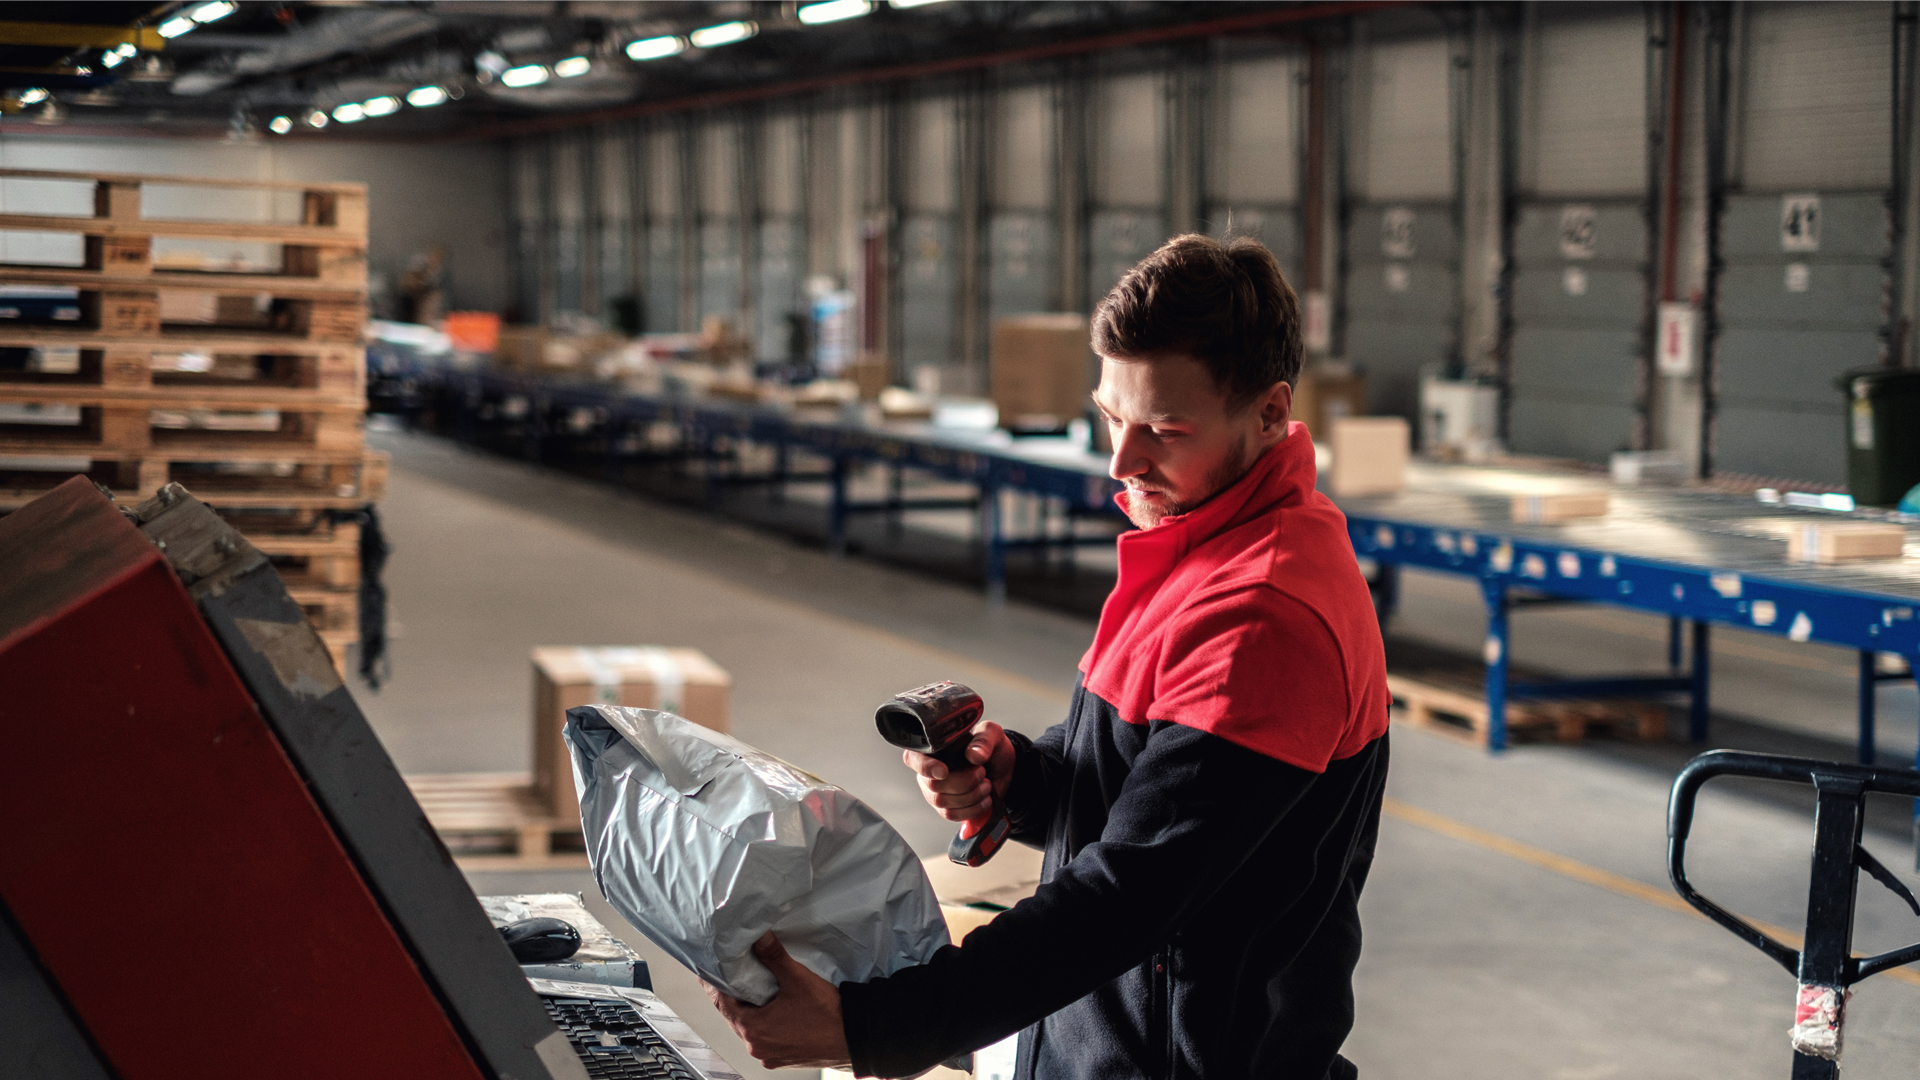 Courier picks up package on a warehouse Indoor Image